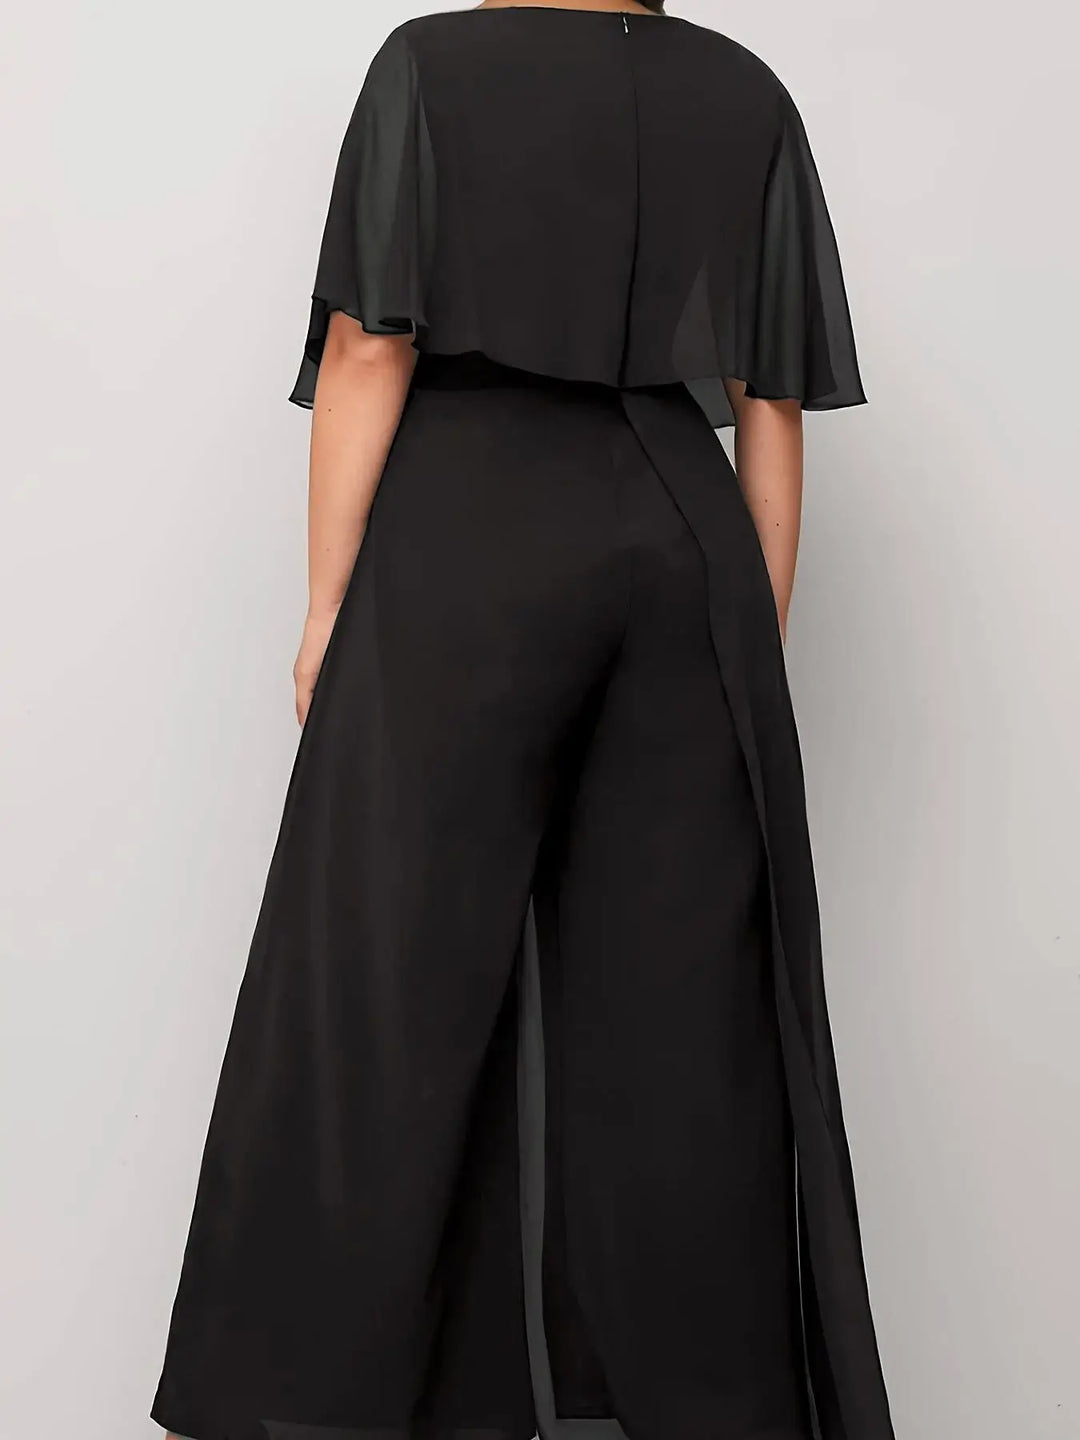 Casual Jumpsuits for Women - Samslivos